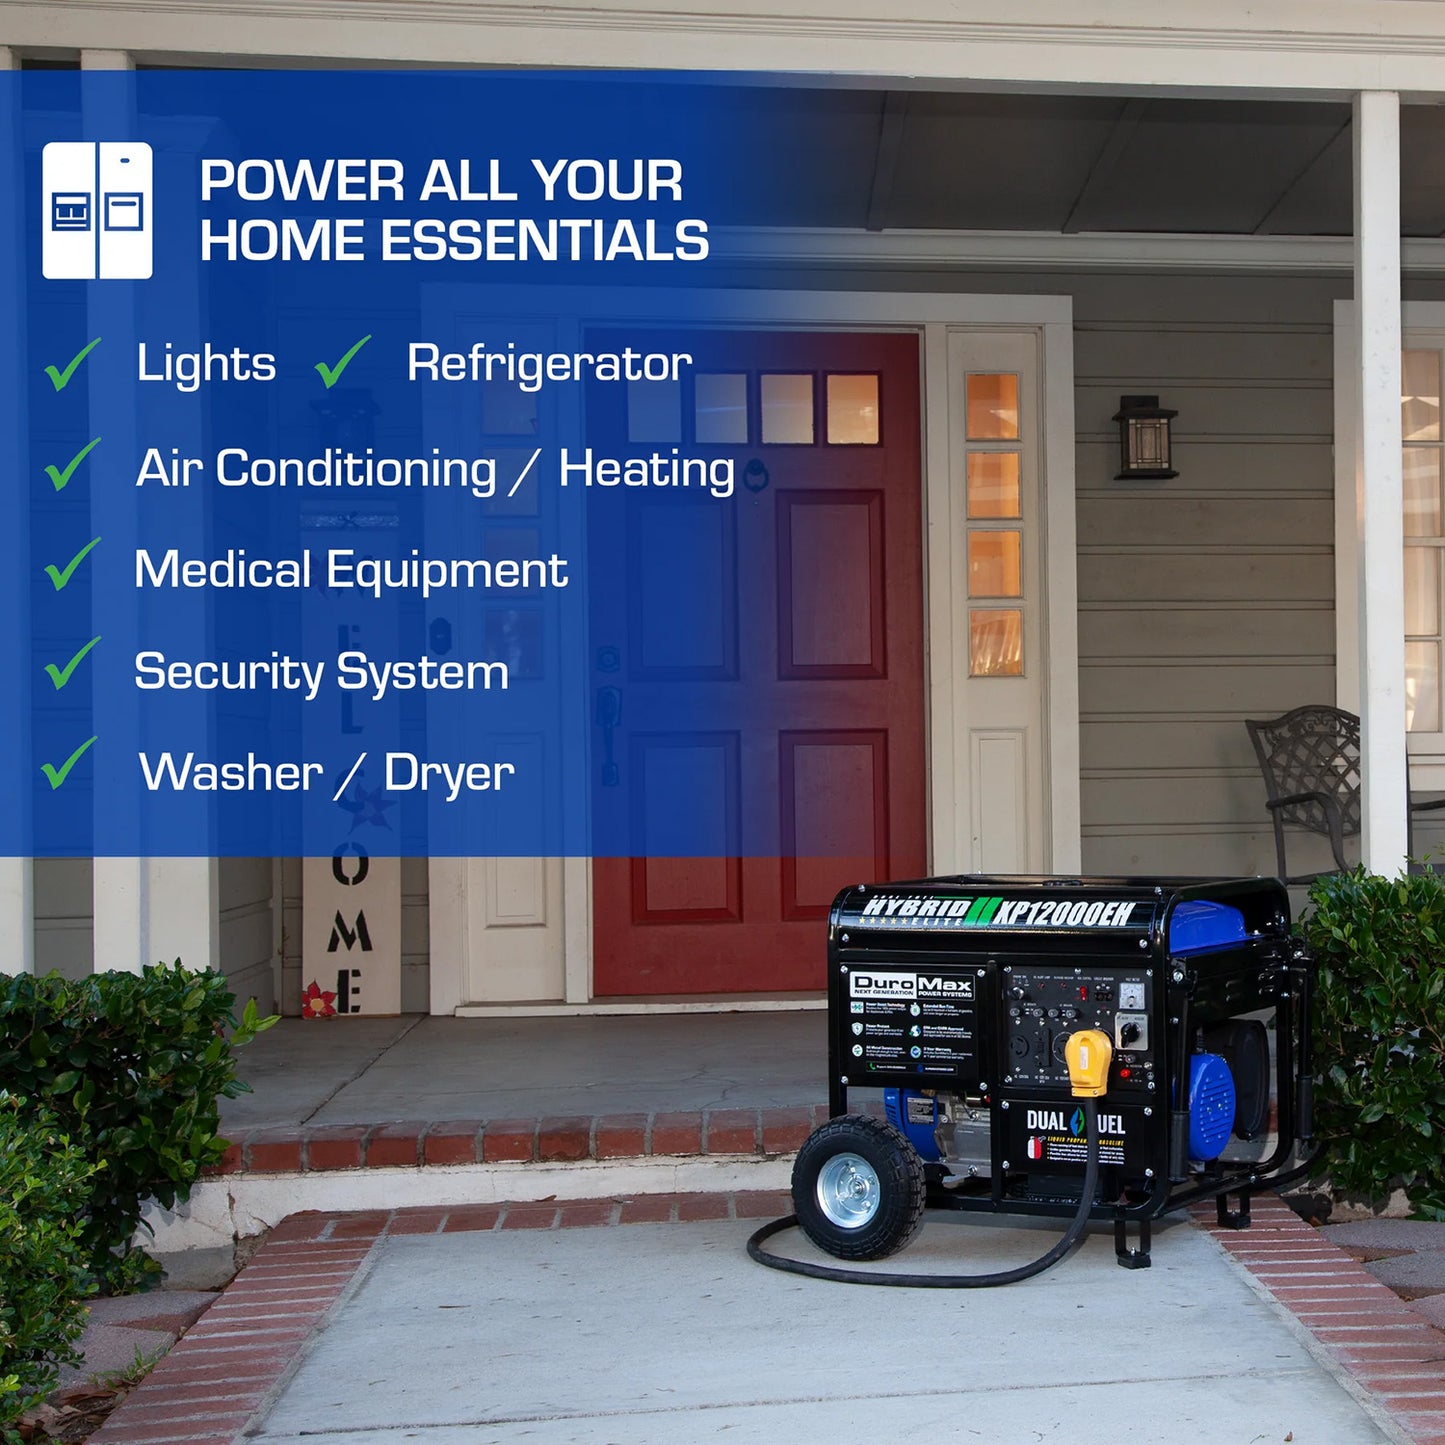 The DuroMax XP12000EH Generator Can Power All Your Home Essentials